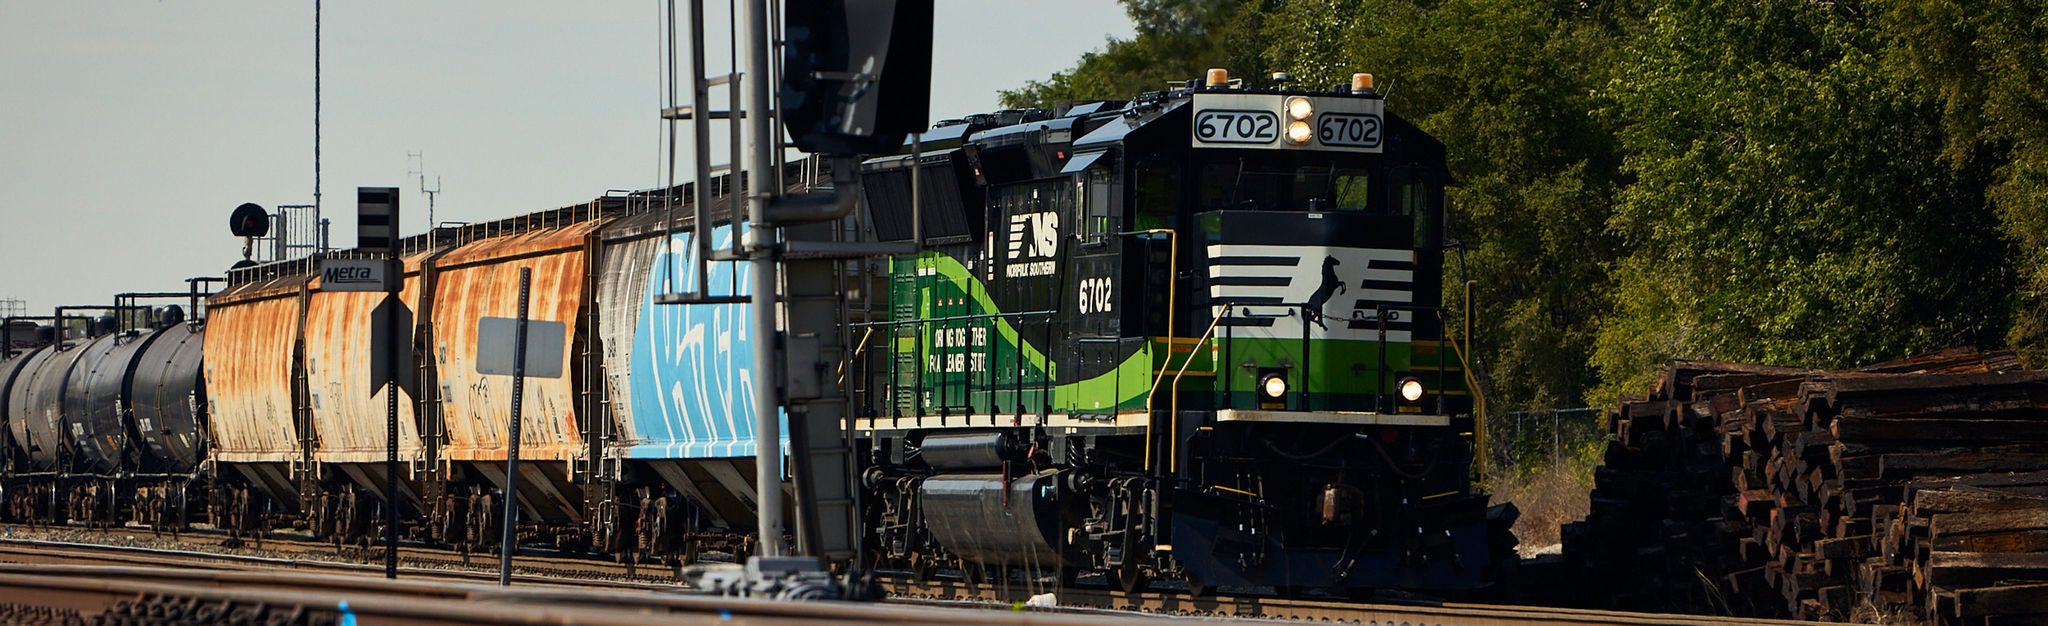 Eco locomotive in yard pulling freight 